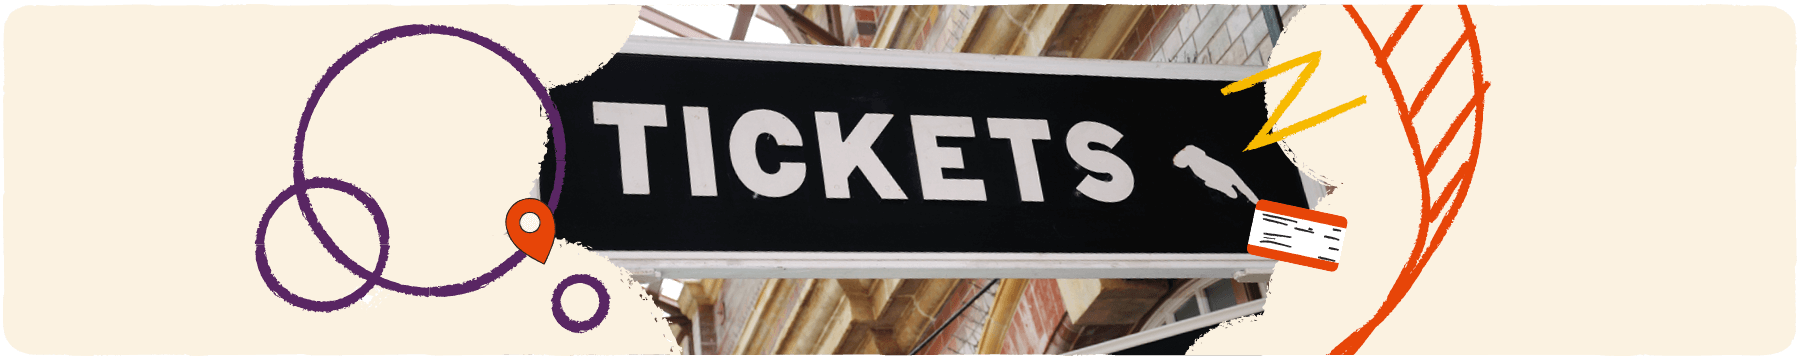 Ticket booking office signage at a train station